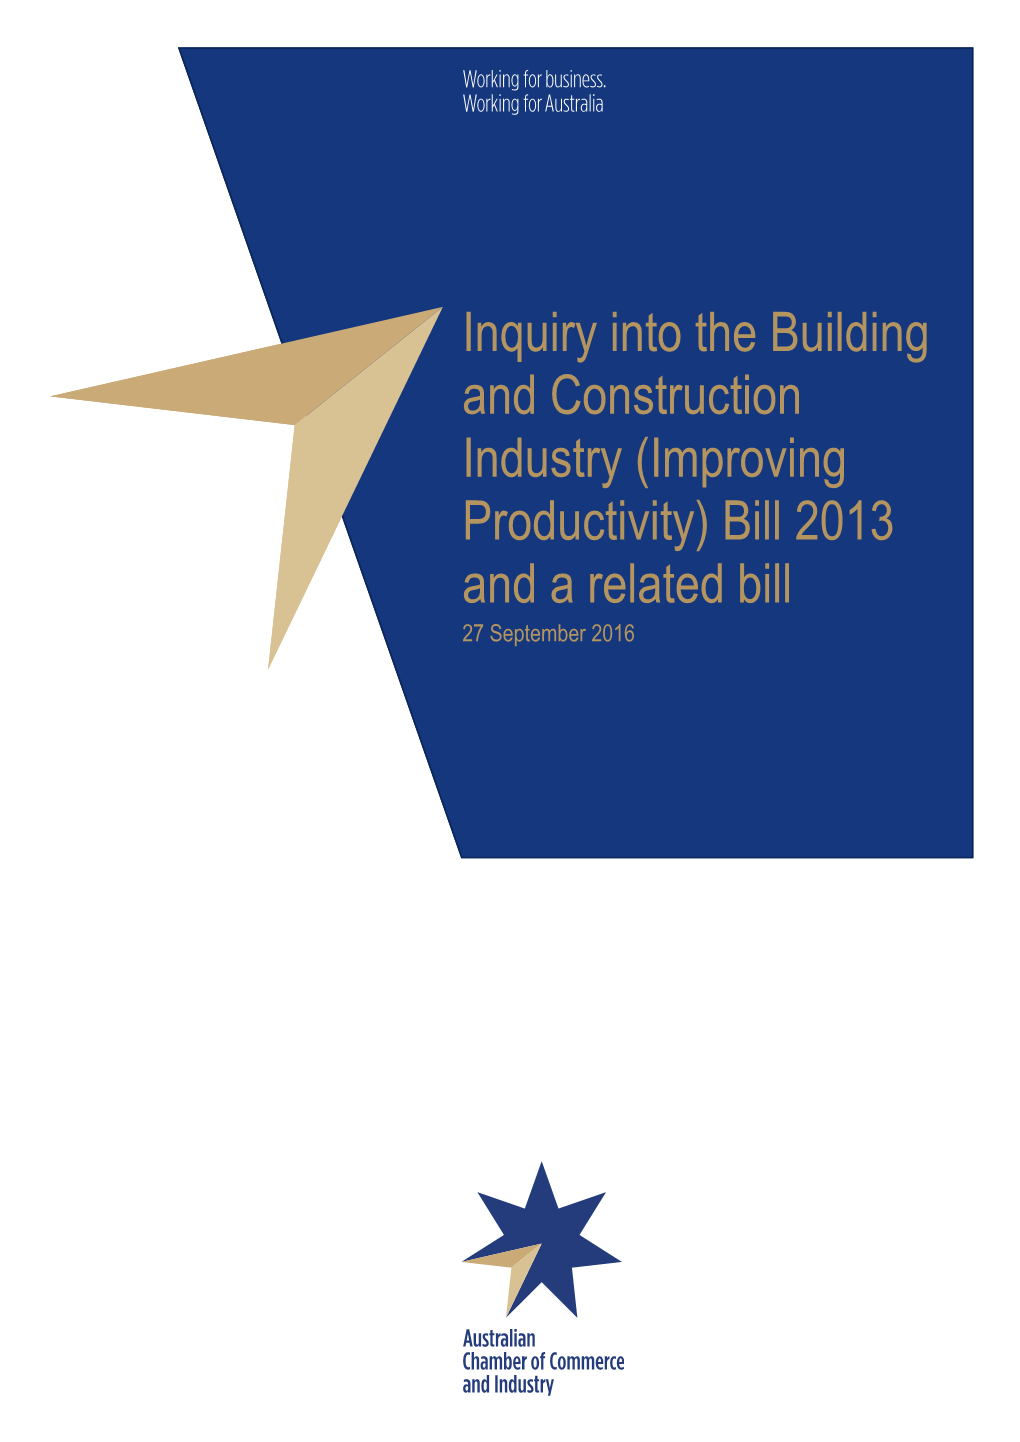 Inquiry Into the Building and Construction Industry (Improving Productivity) Bill 2013 and a Related Bill 27 September 2016